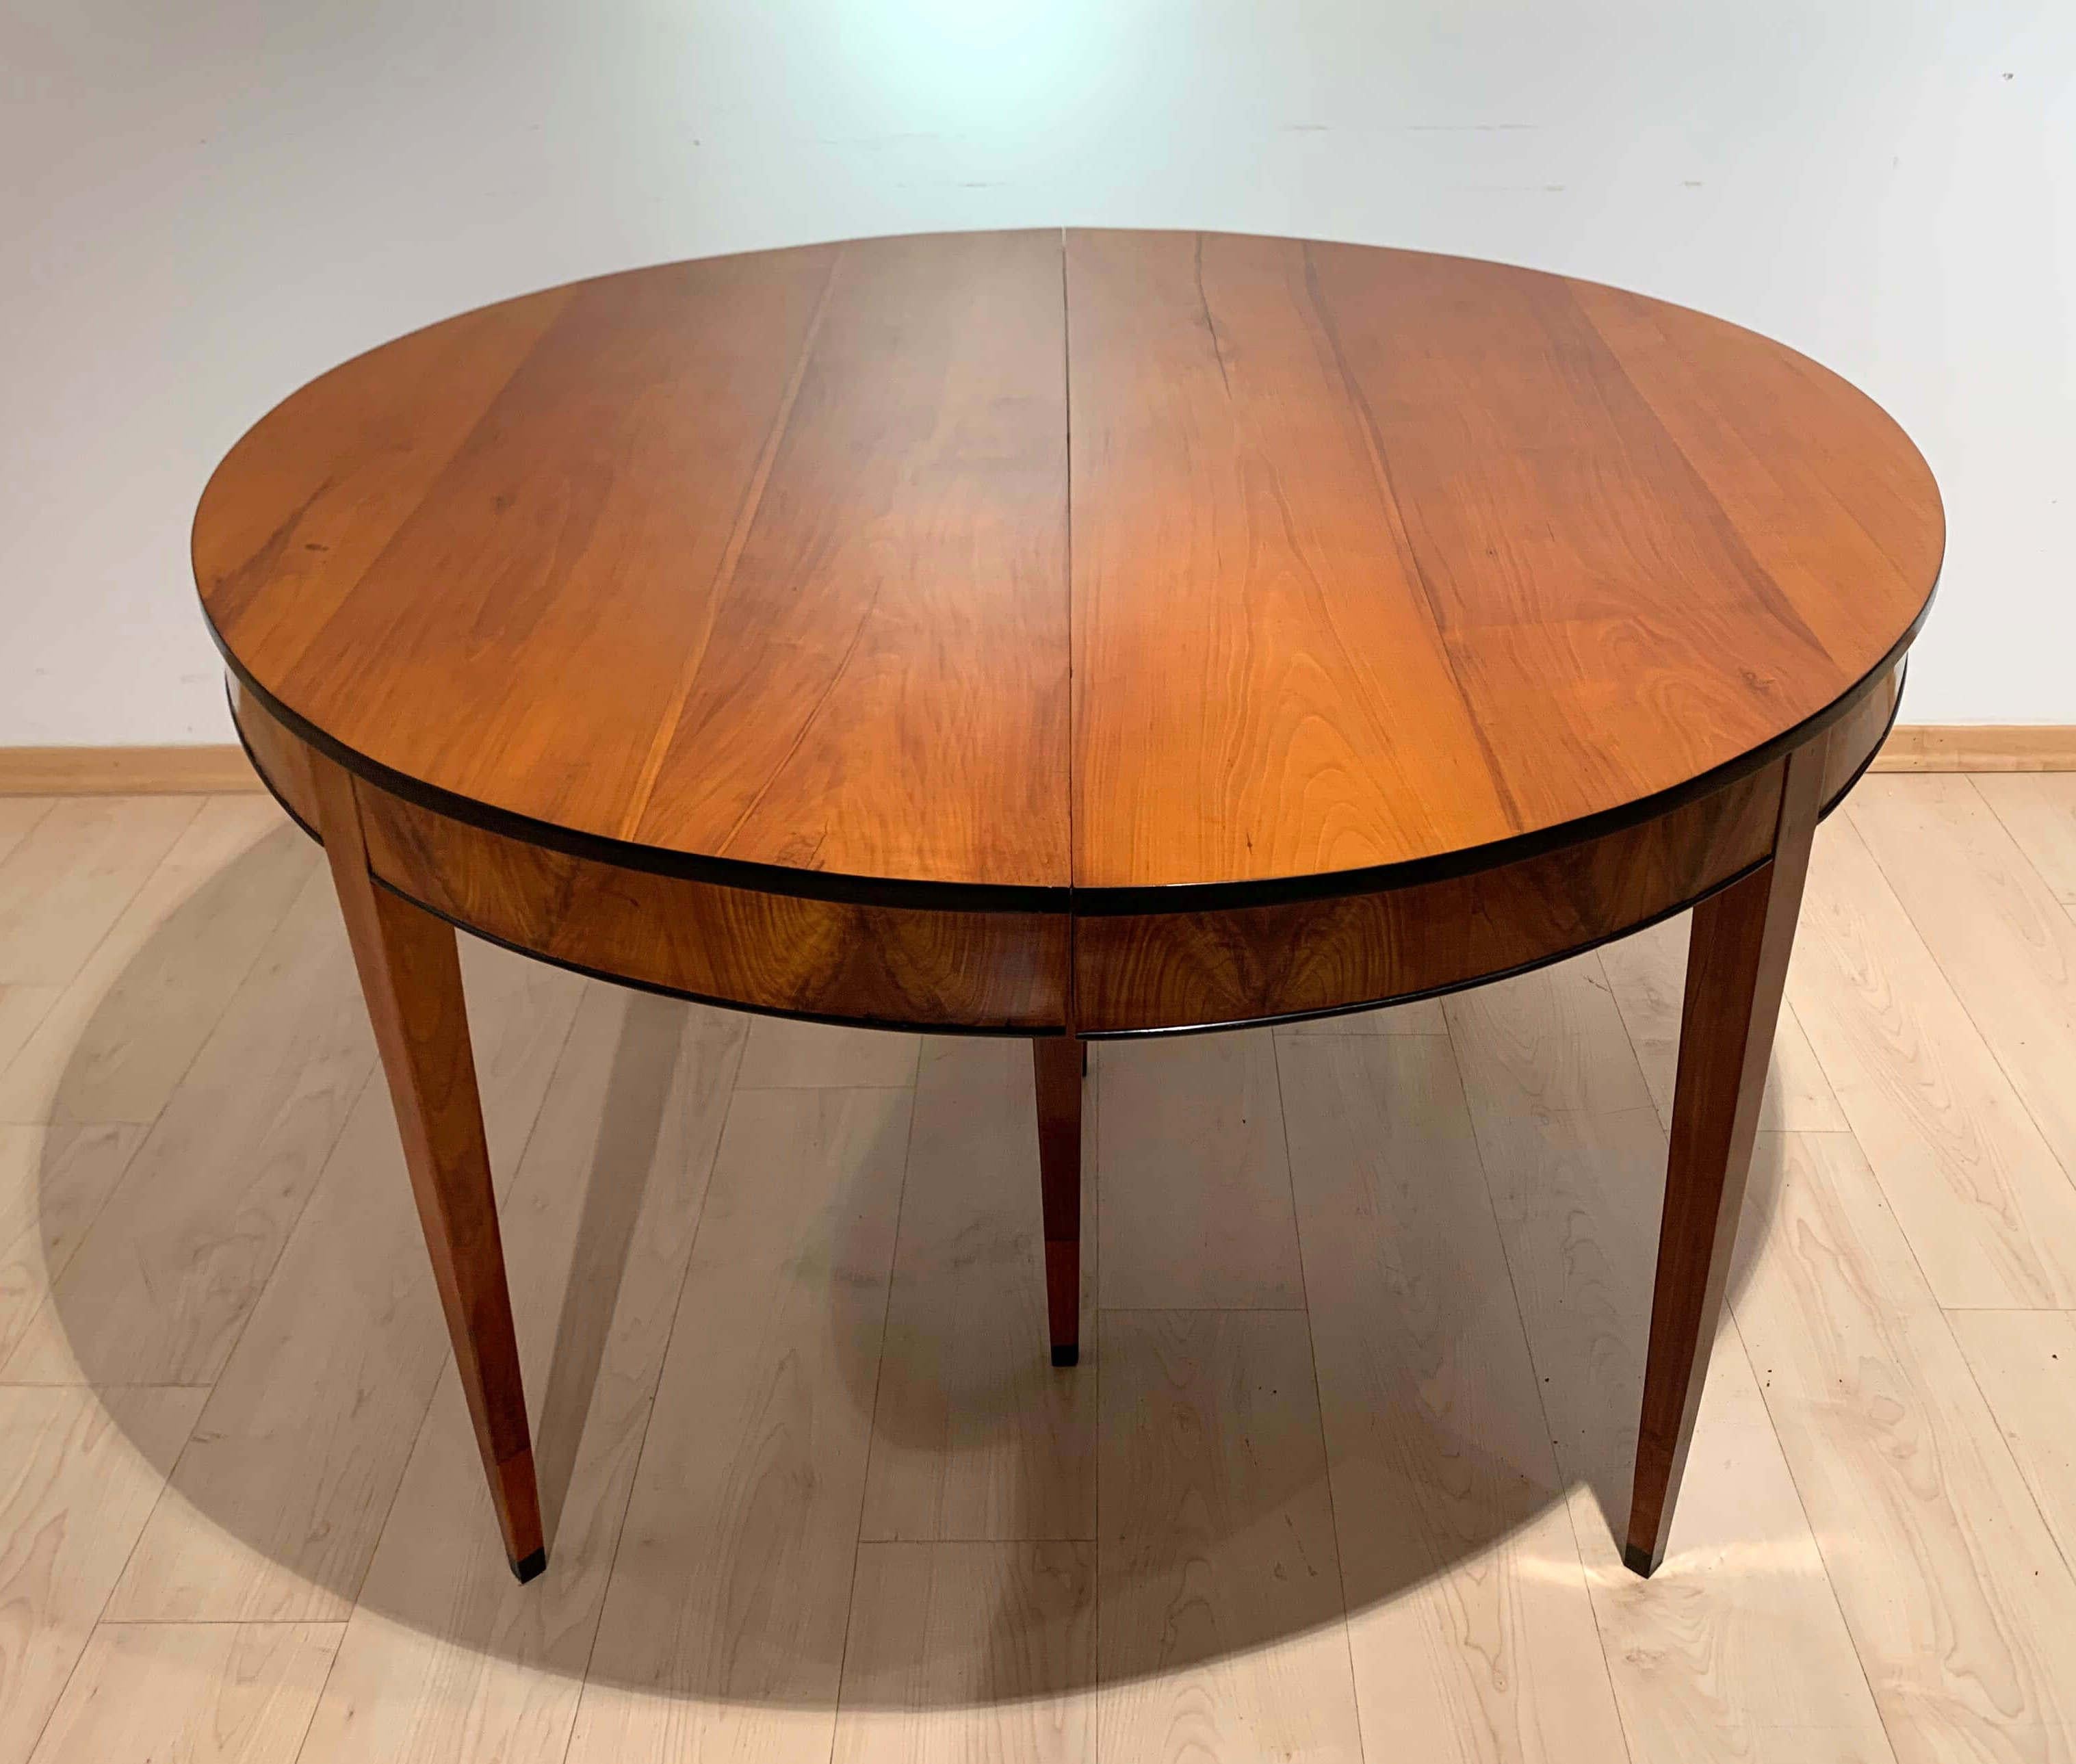 Elegant, round, expandable / expanding neoclassical Biedermeier dining room table in cherry solid wood and veneer, from Southwest Germany about 1820.

Exquisite cherry solid wood on the plate and legs as well as book-matched cherry veneer on the